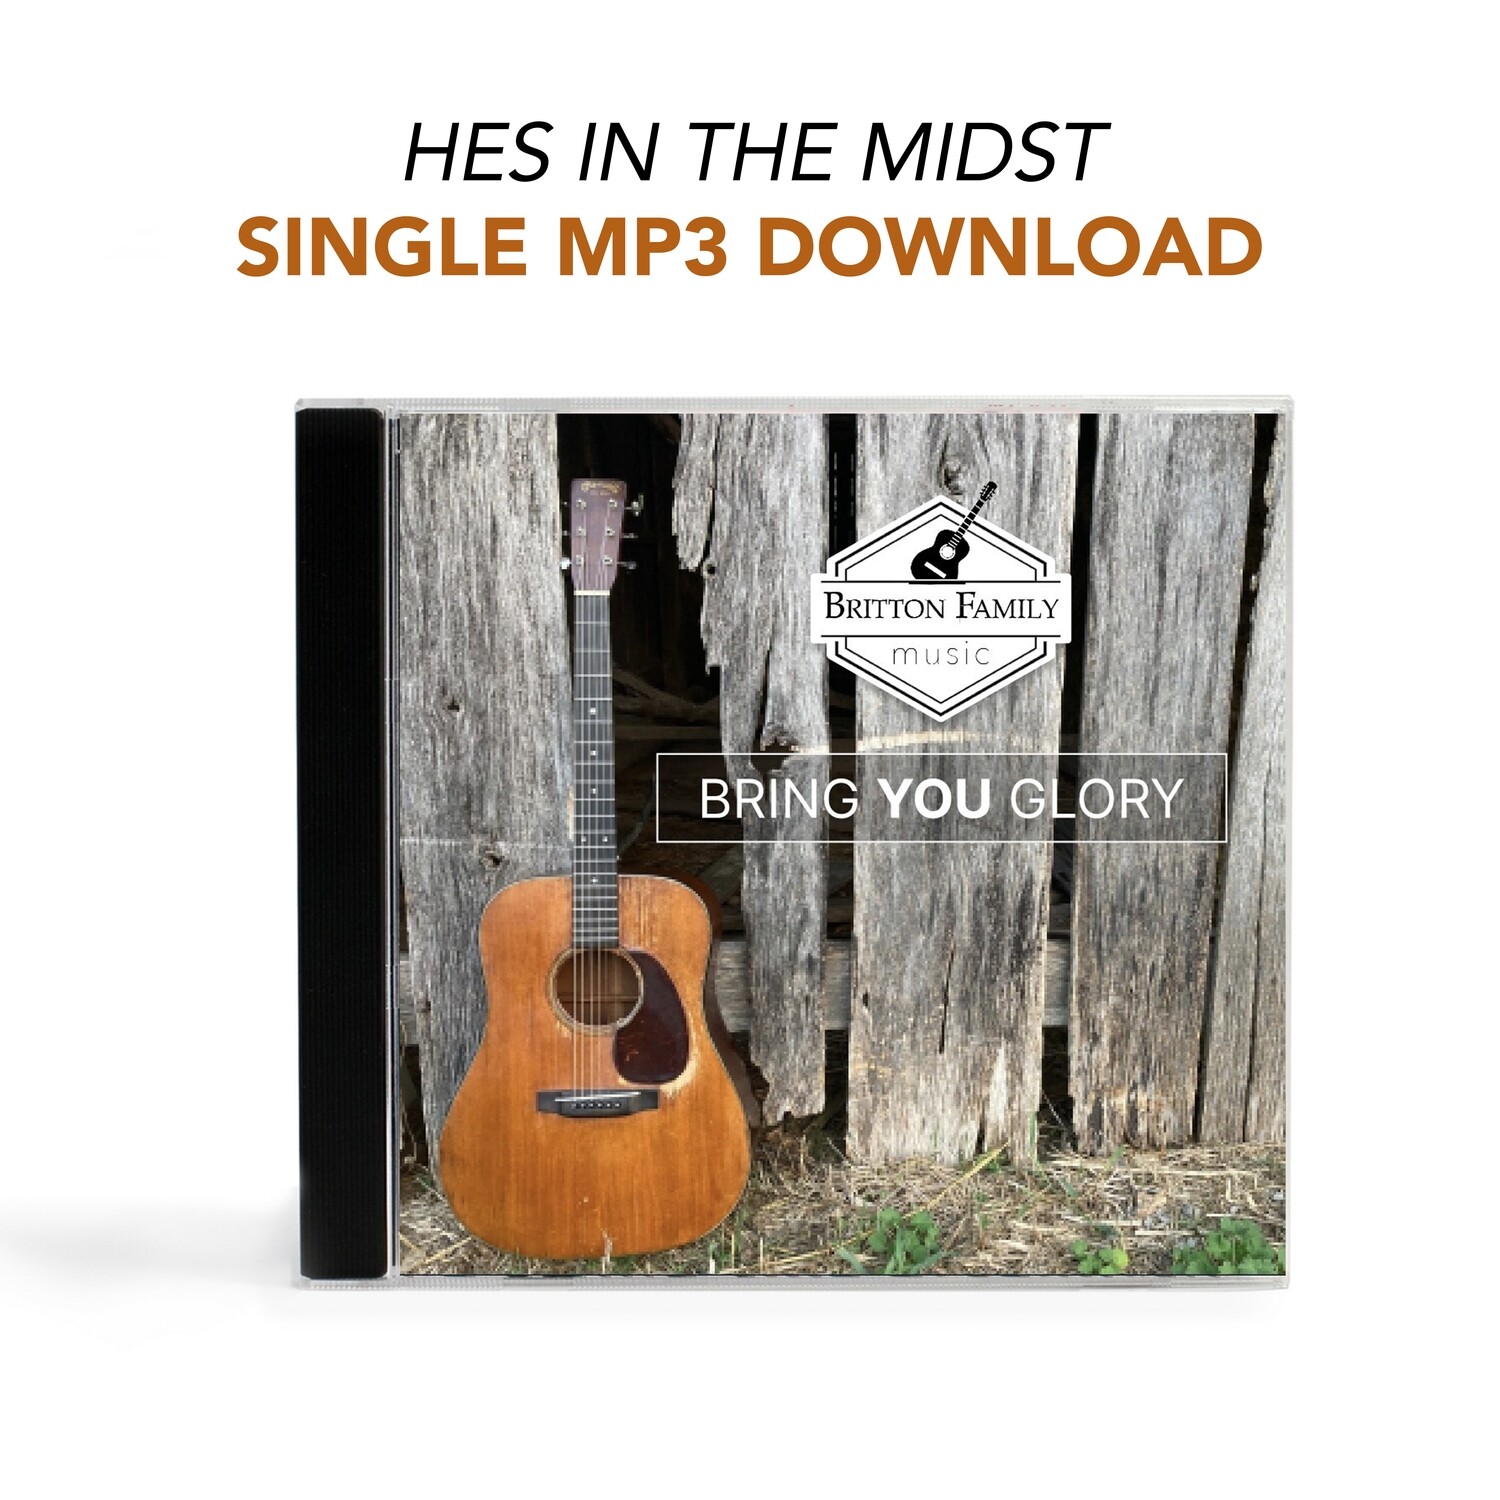 Hes In The Midst - Single MP3 Download